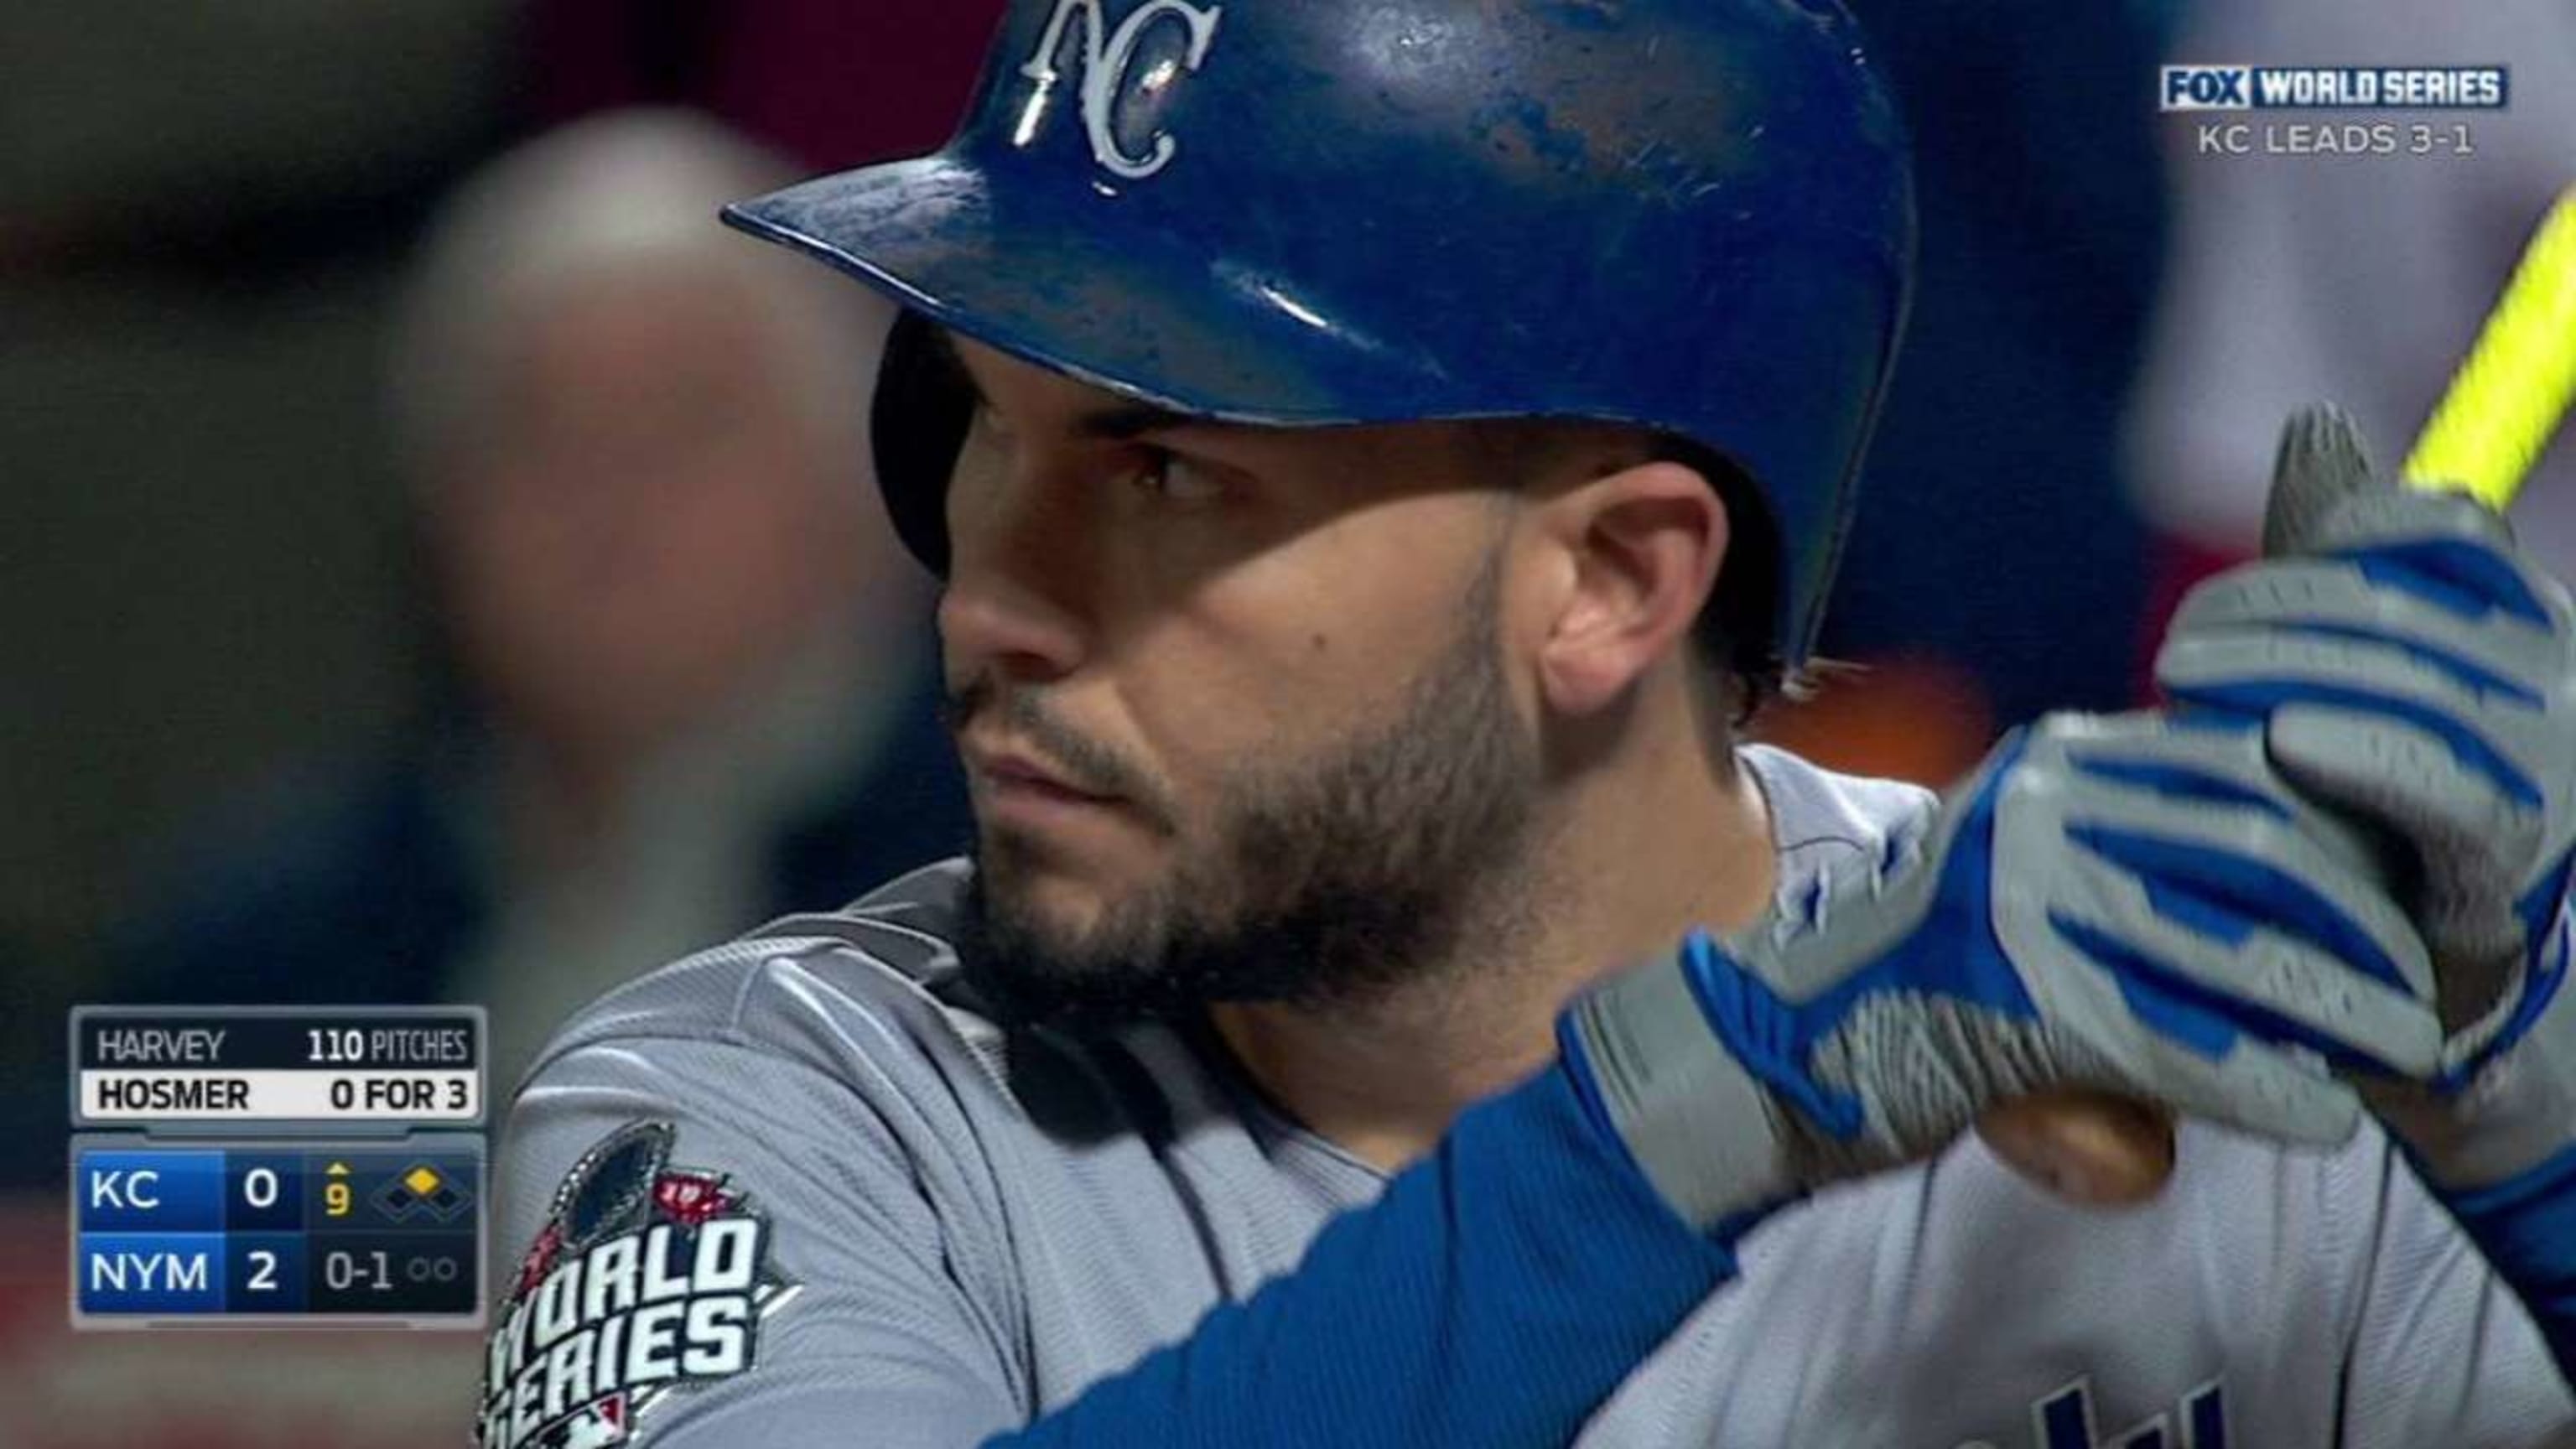 World Series 2015: Royals win first title since '85 on Hosmer's